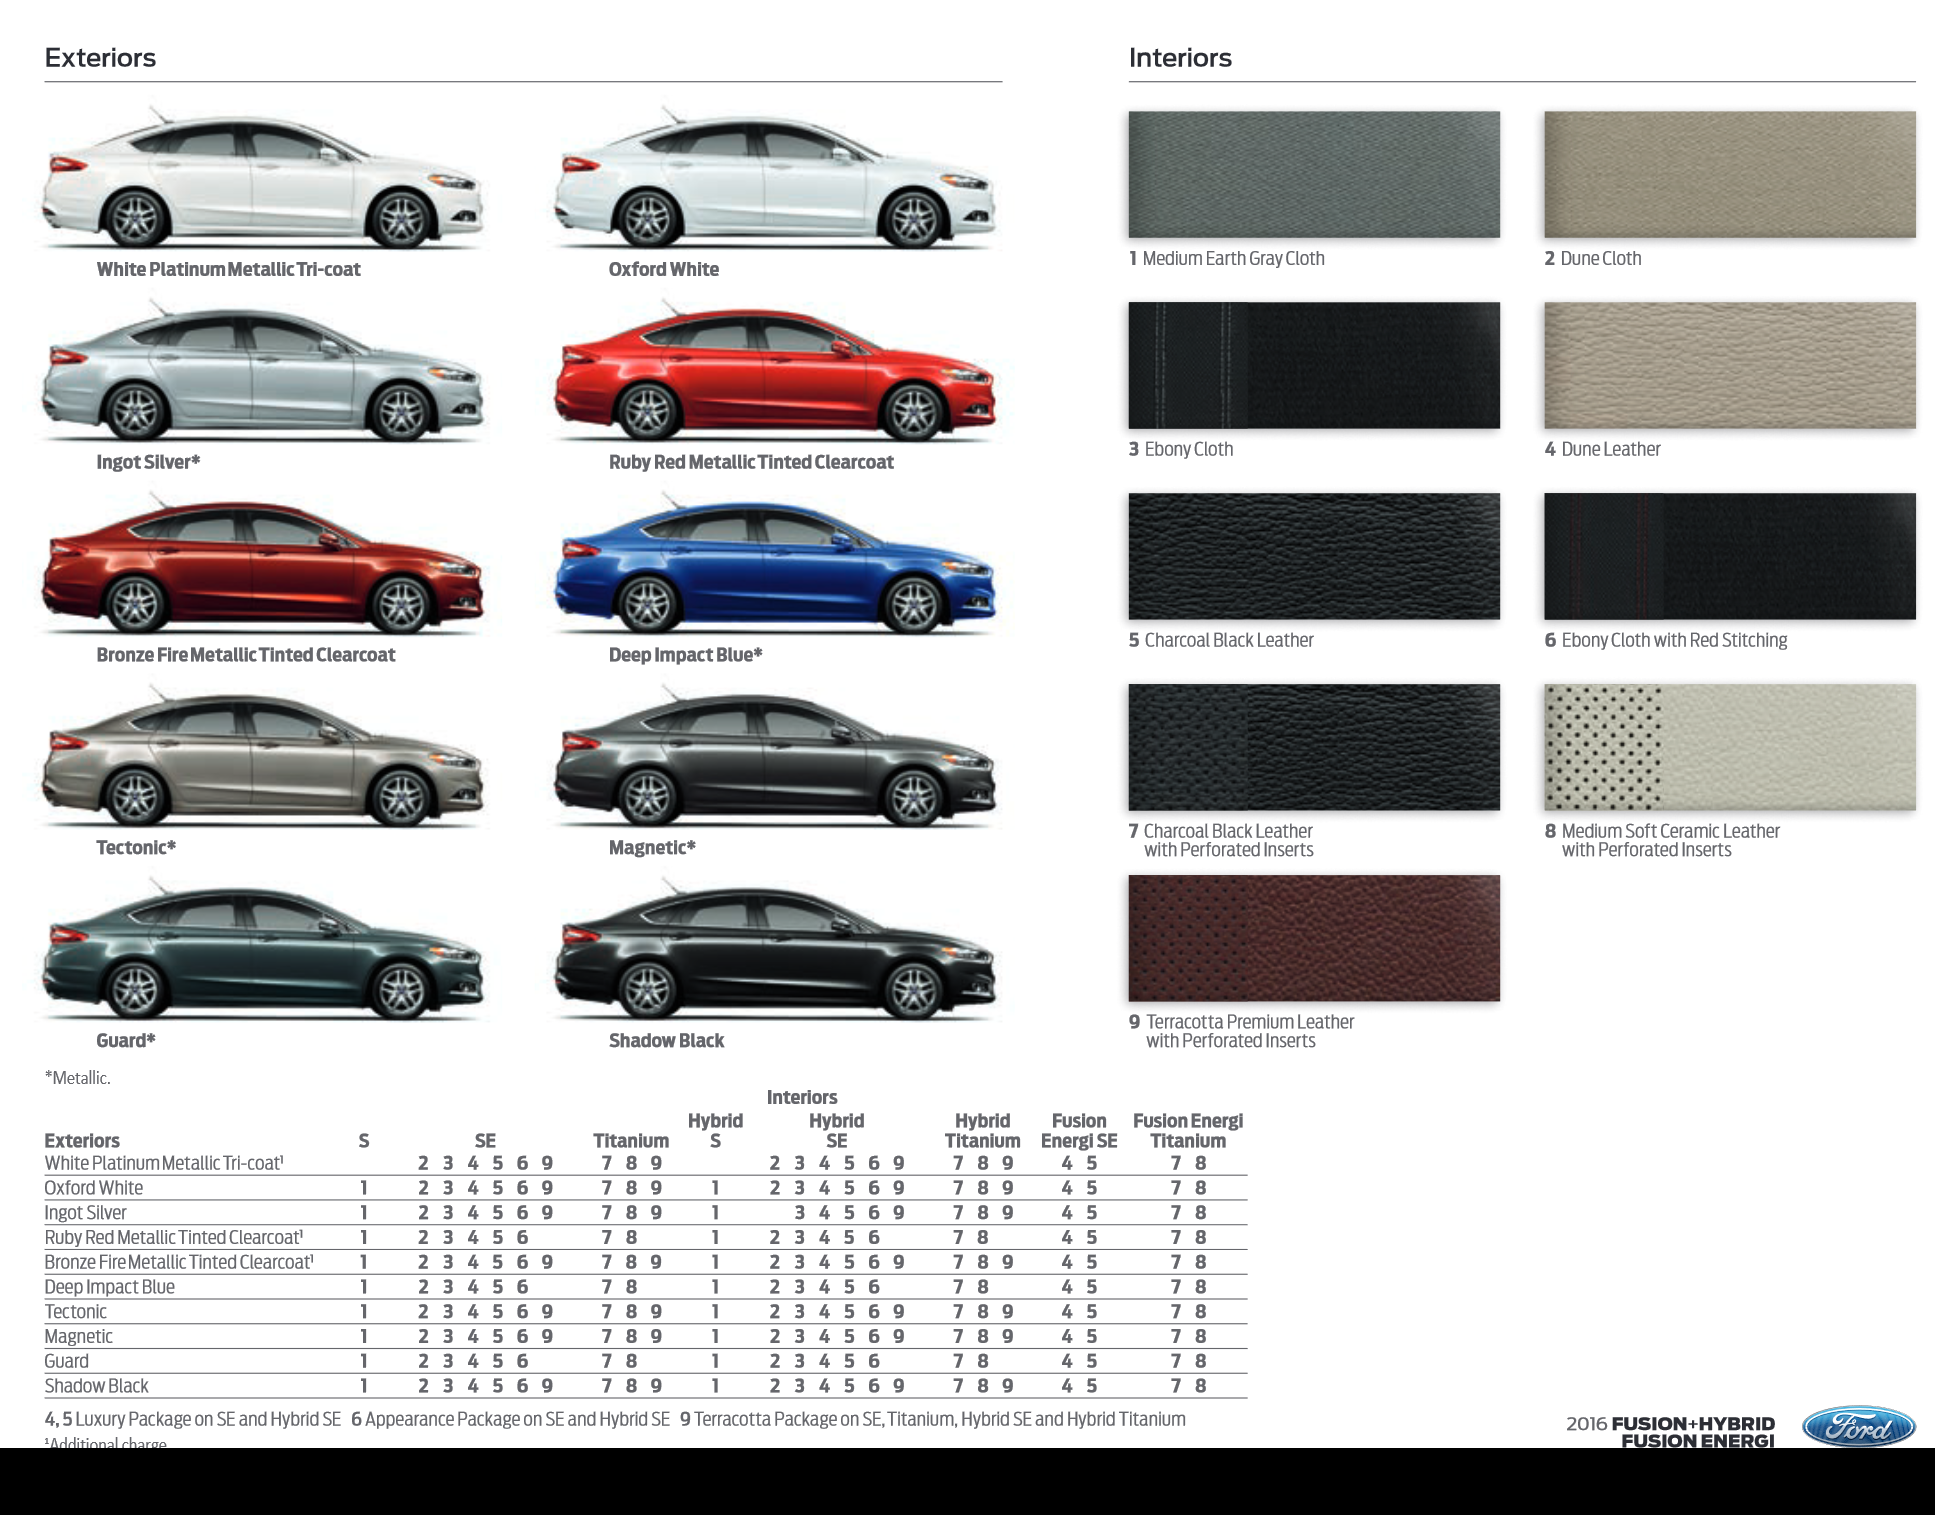 a photo showing the different color options the Ford Fusion came in.